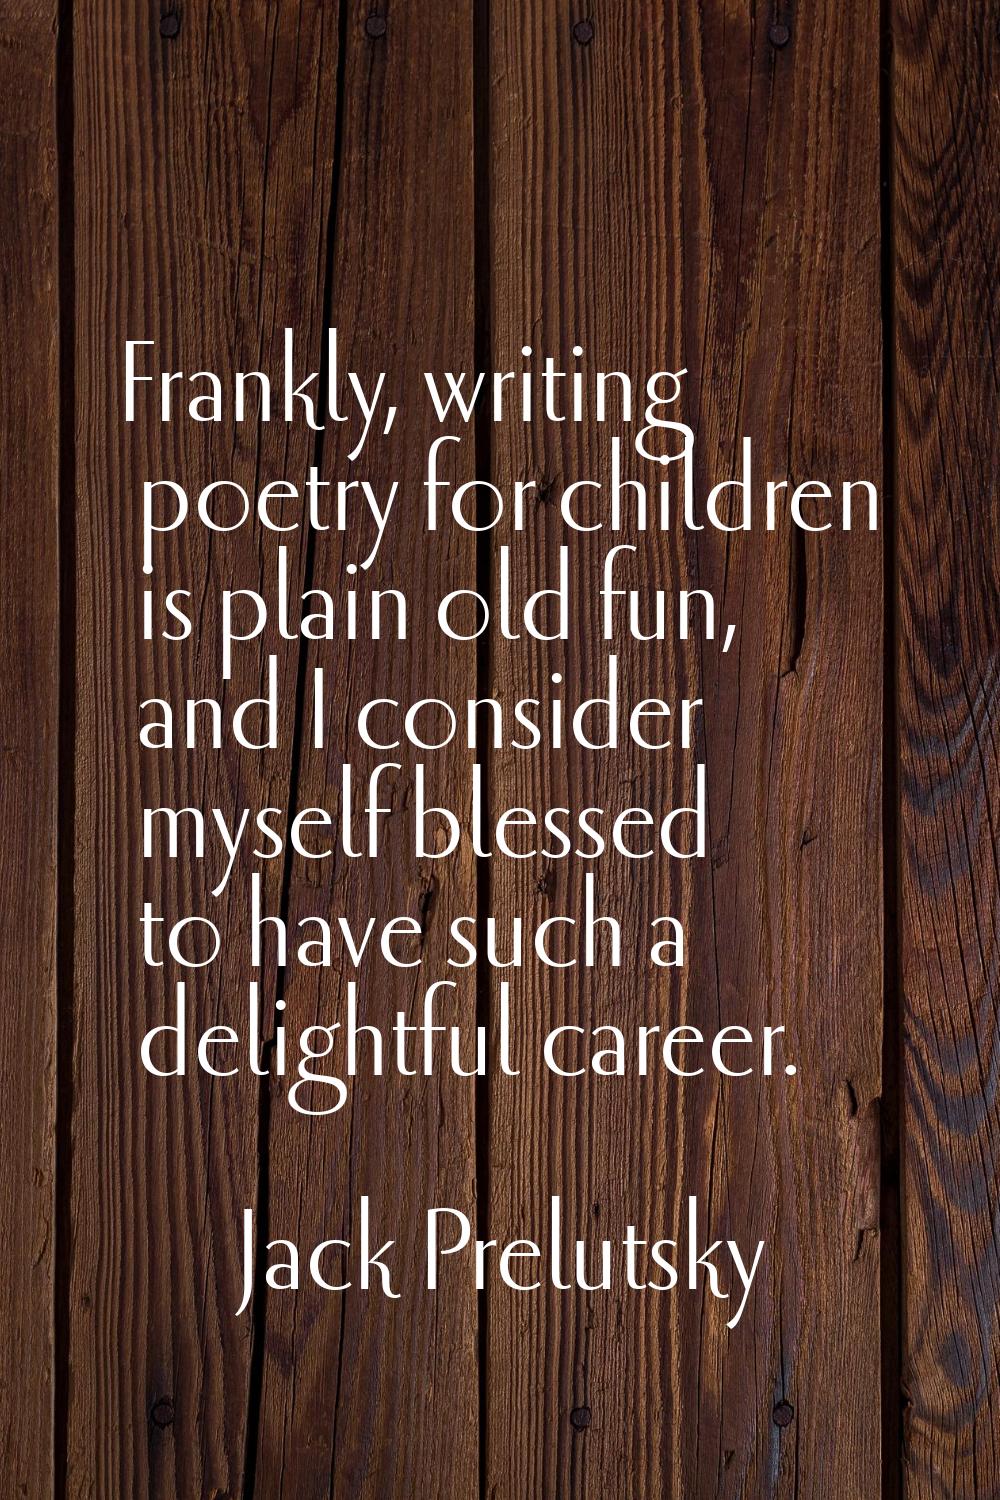 Frankly, writing poetry for children is plain old fun, and I consider myself blessed to have such a